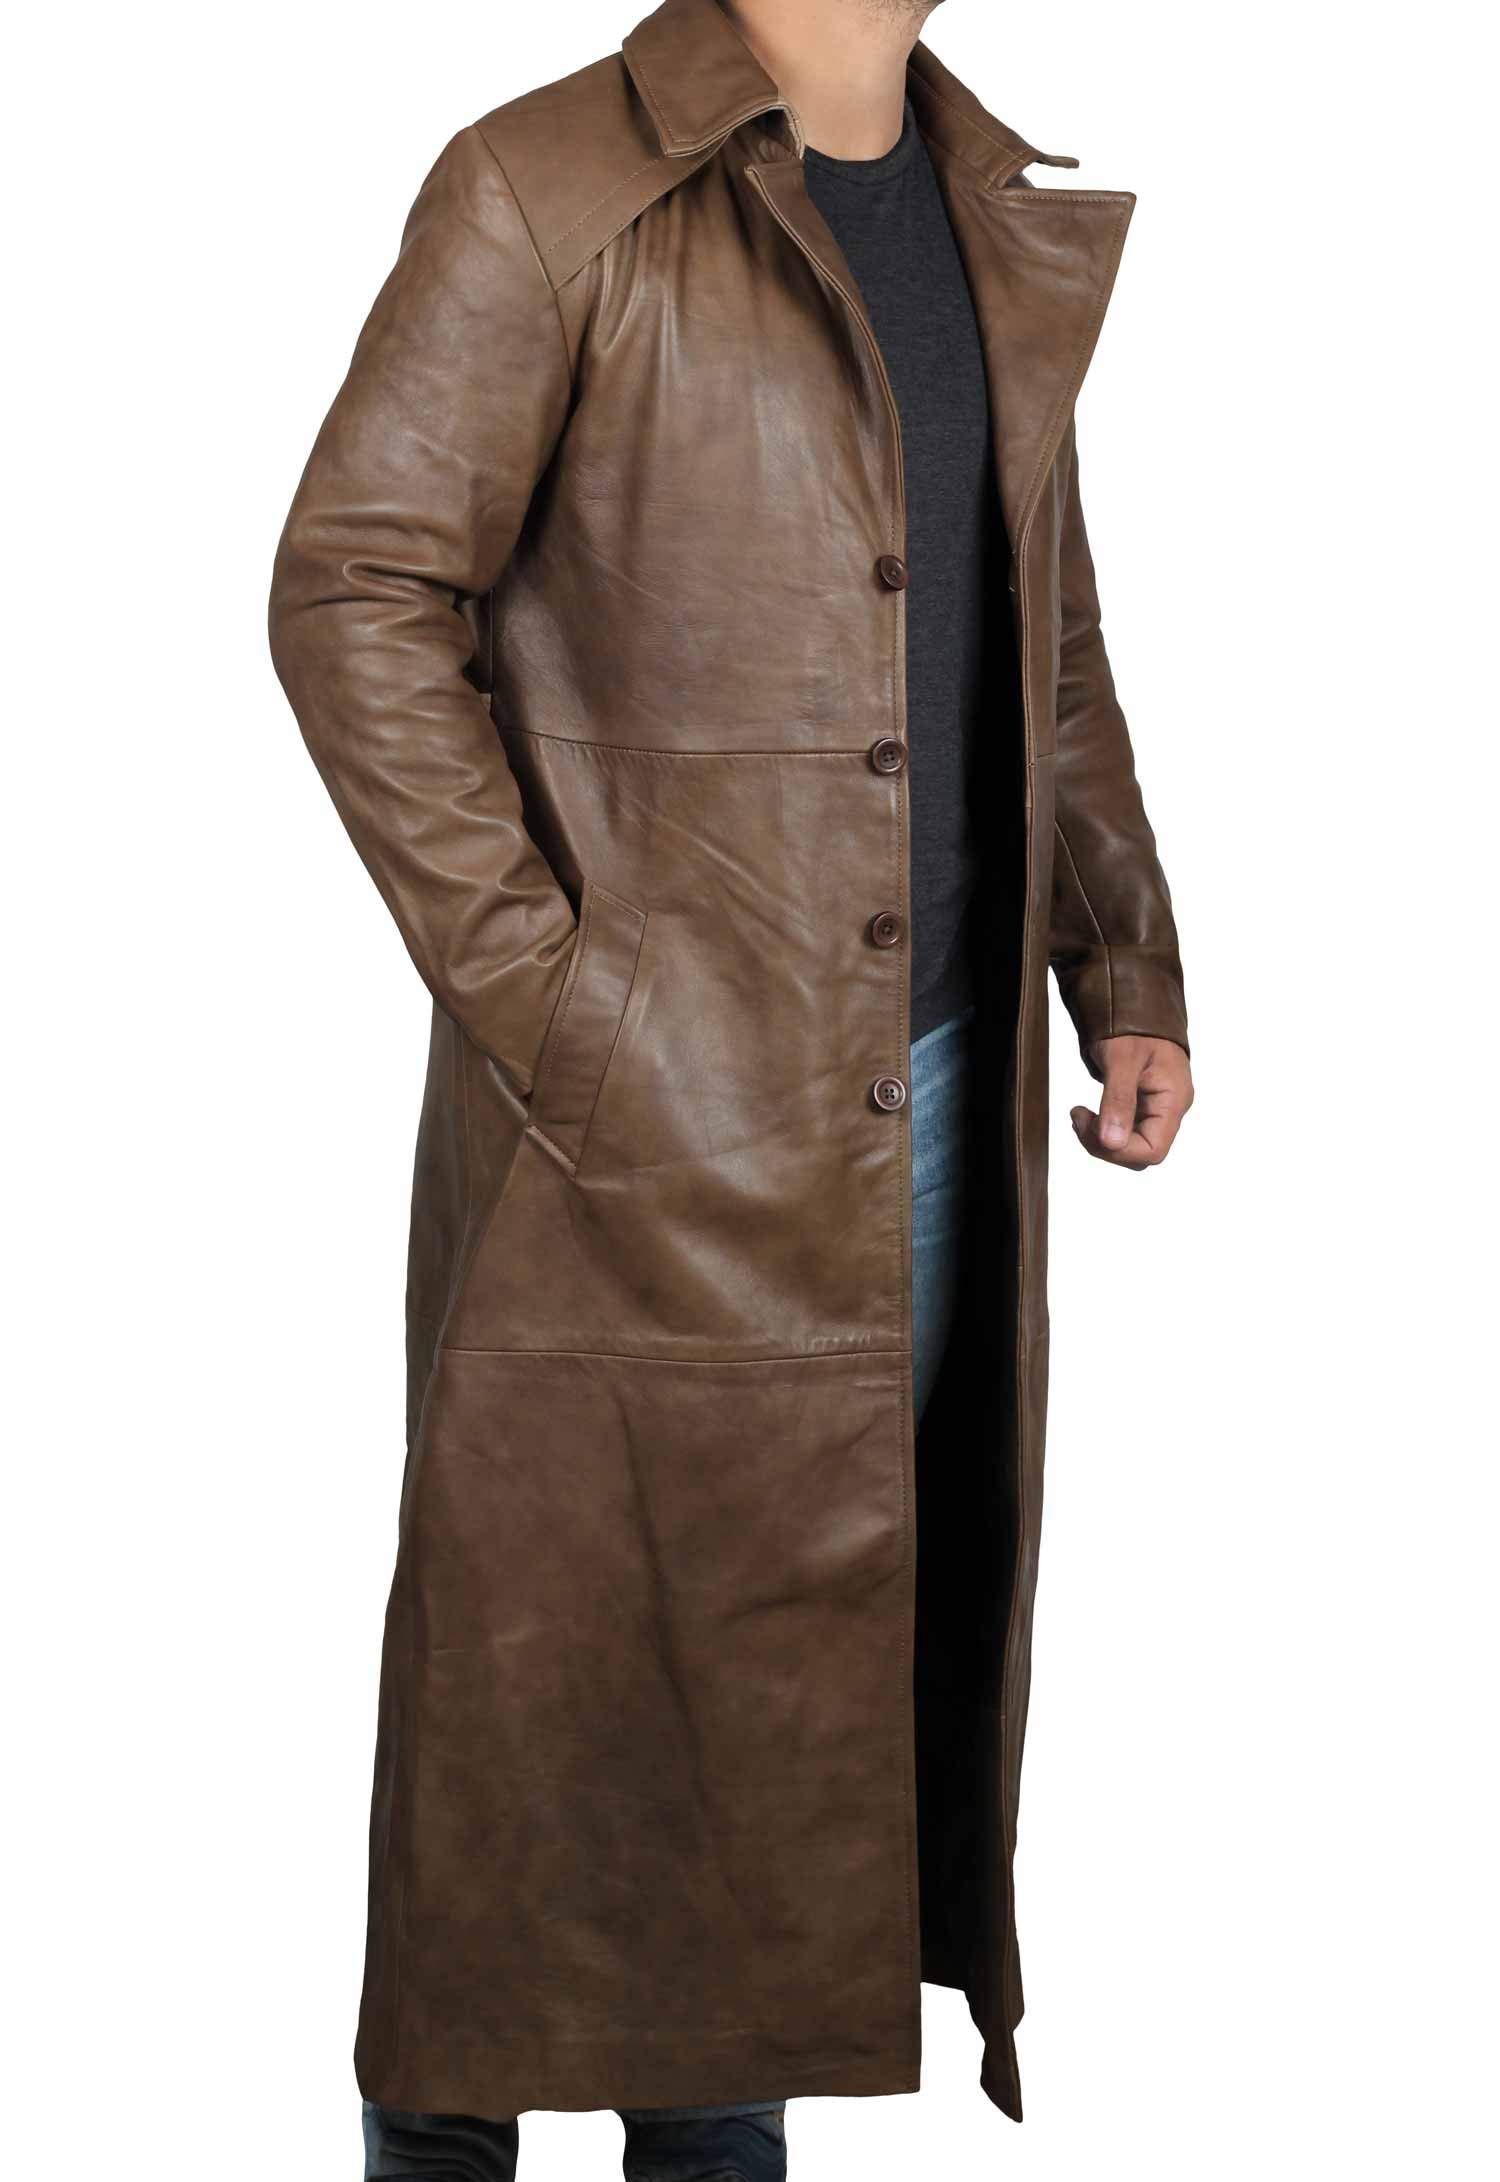 Brown Winter Trench Coat Men - Distressed Black Real Leather Long Overcoat